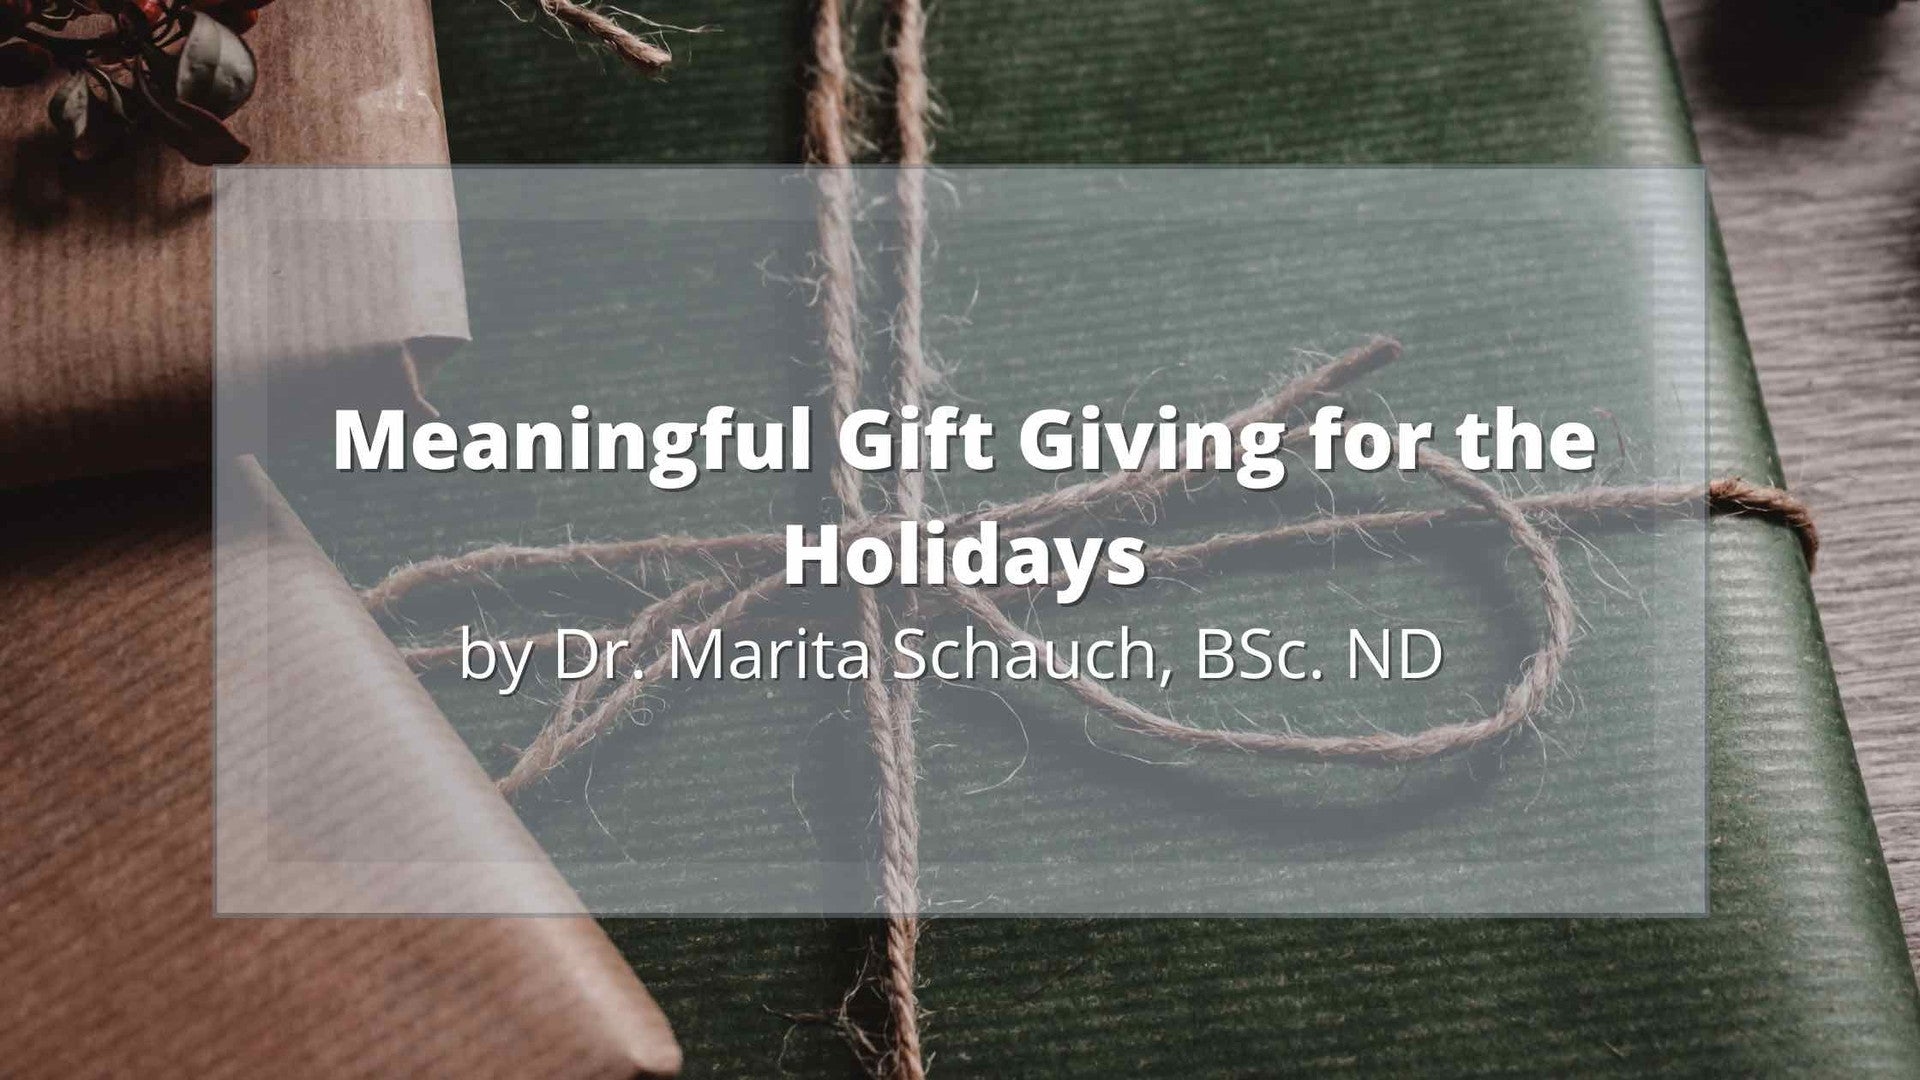 Meaningful Gift Giving for the Holidays